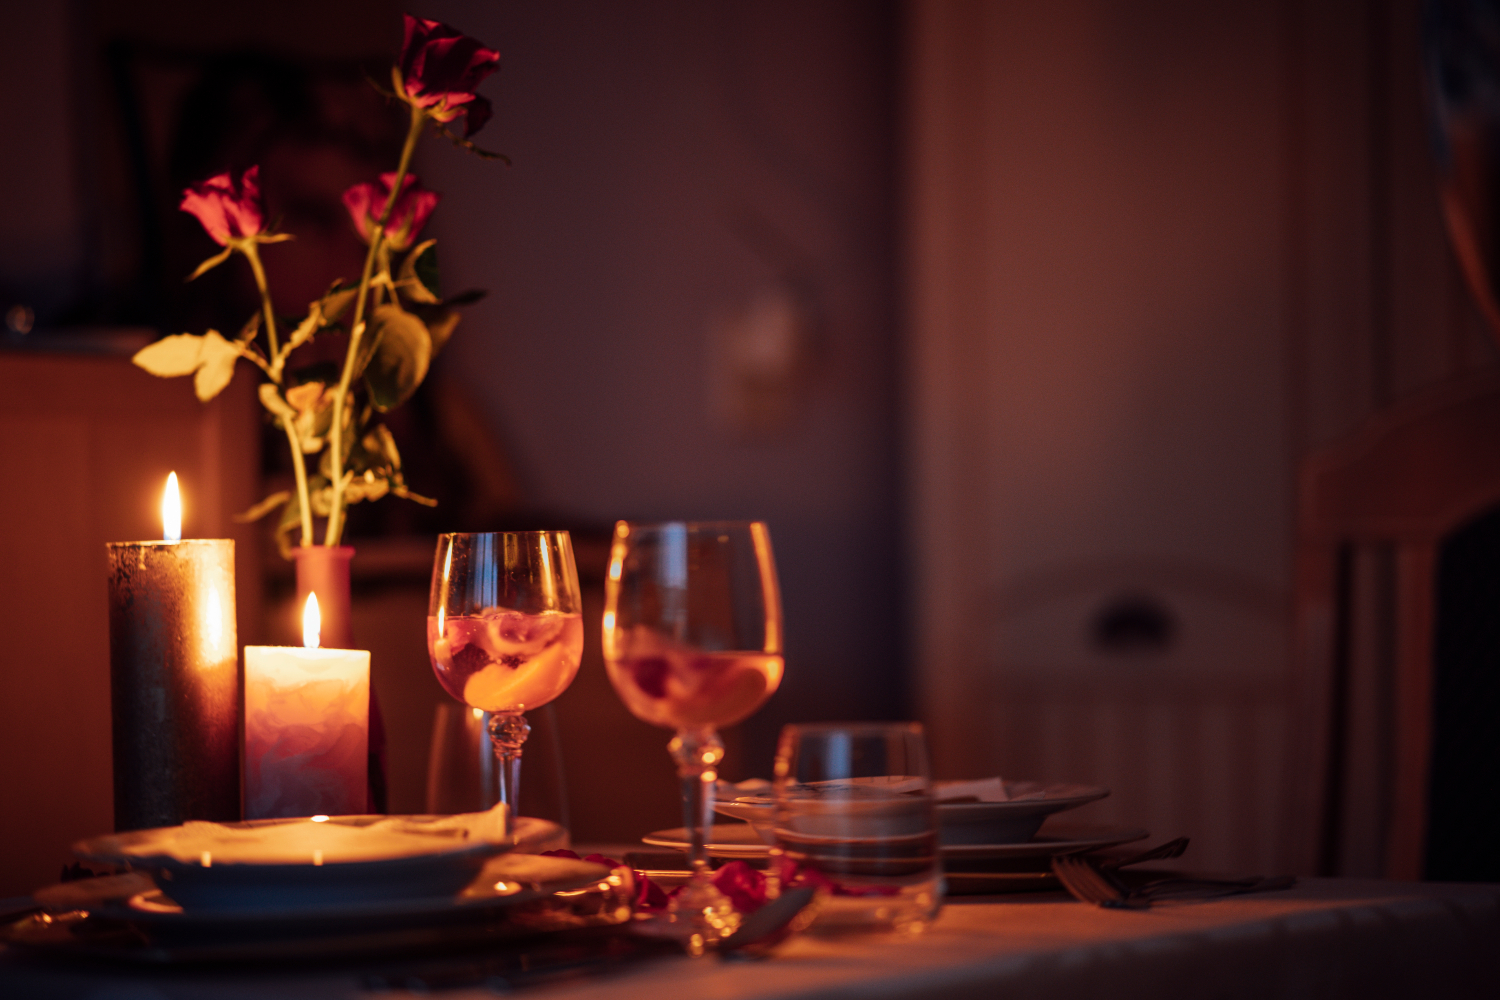 Romantic candle-lit dinner with wine glasses and roses